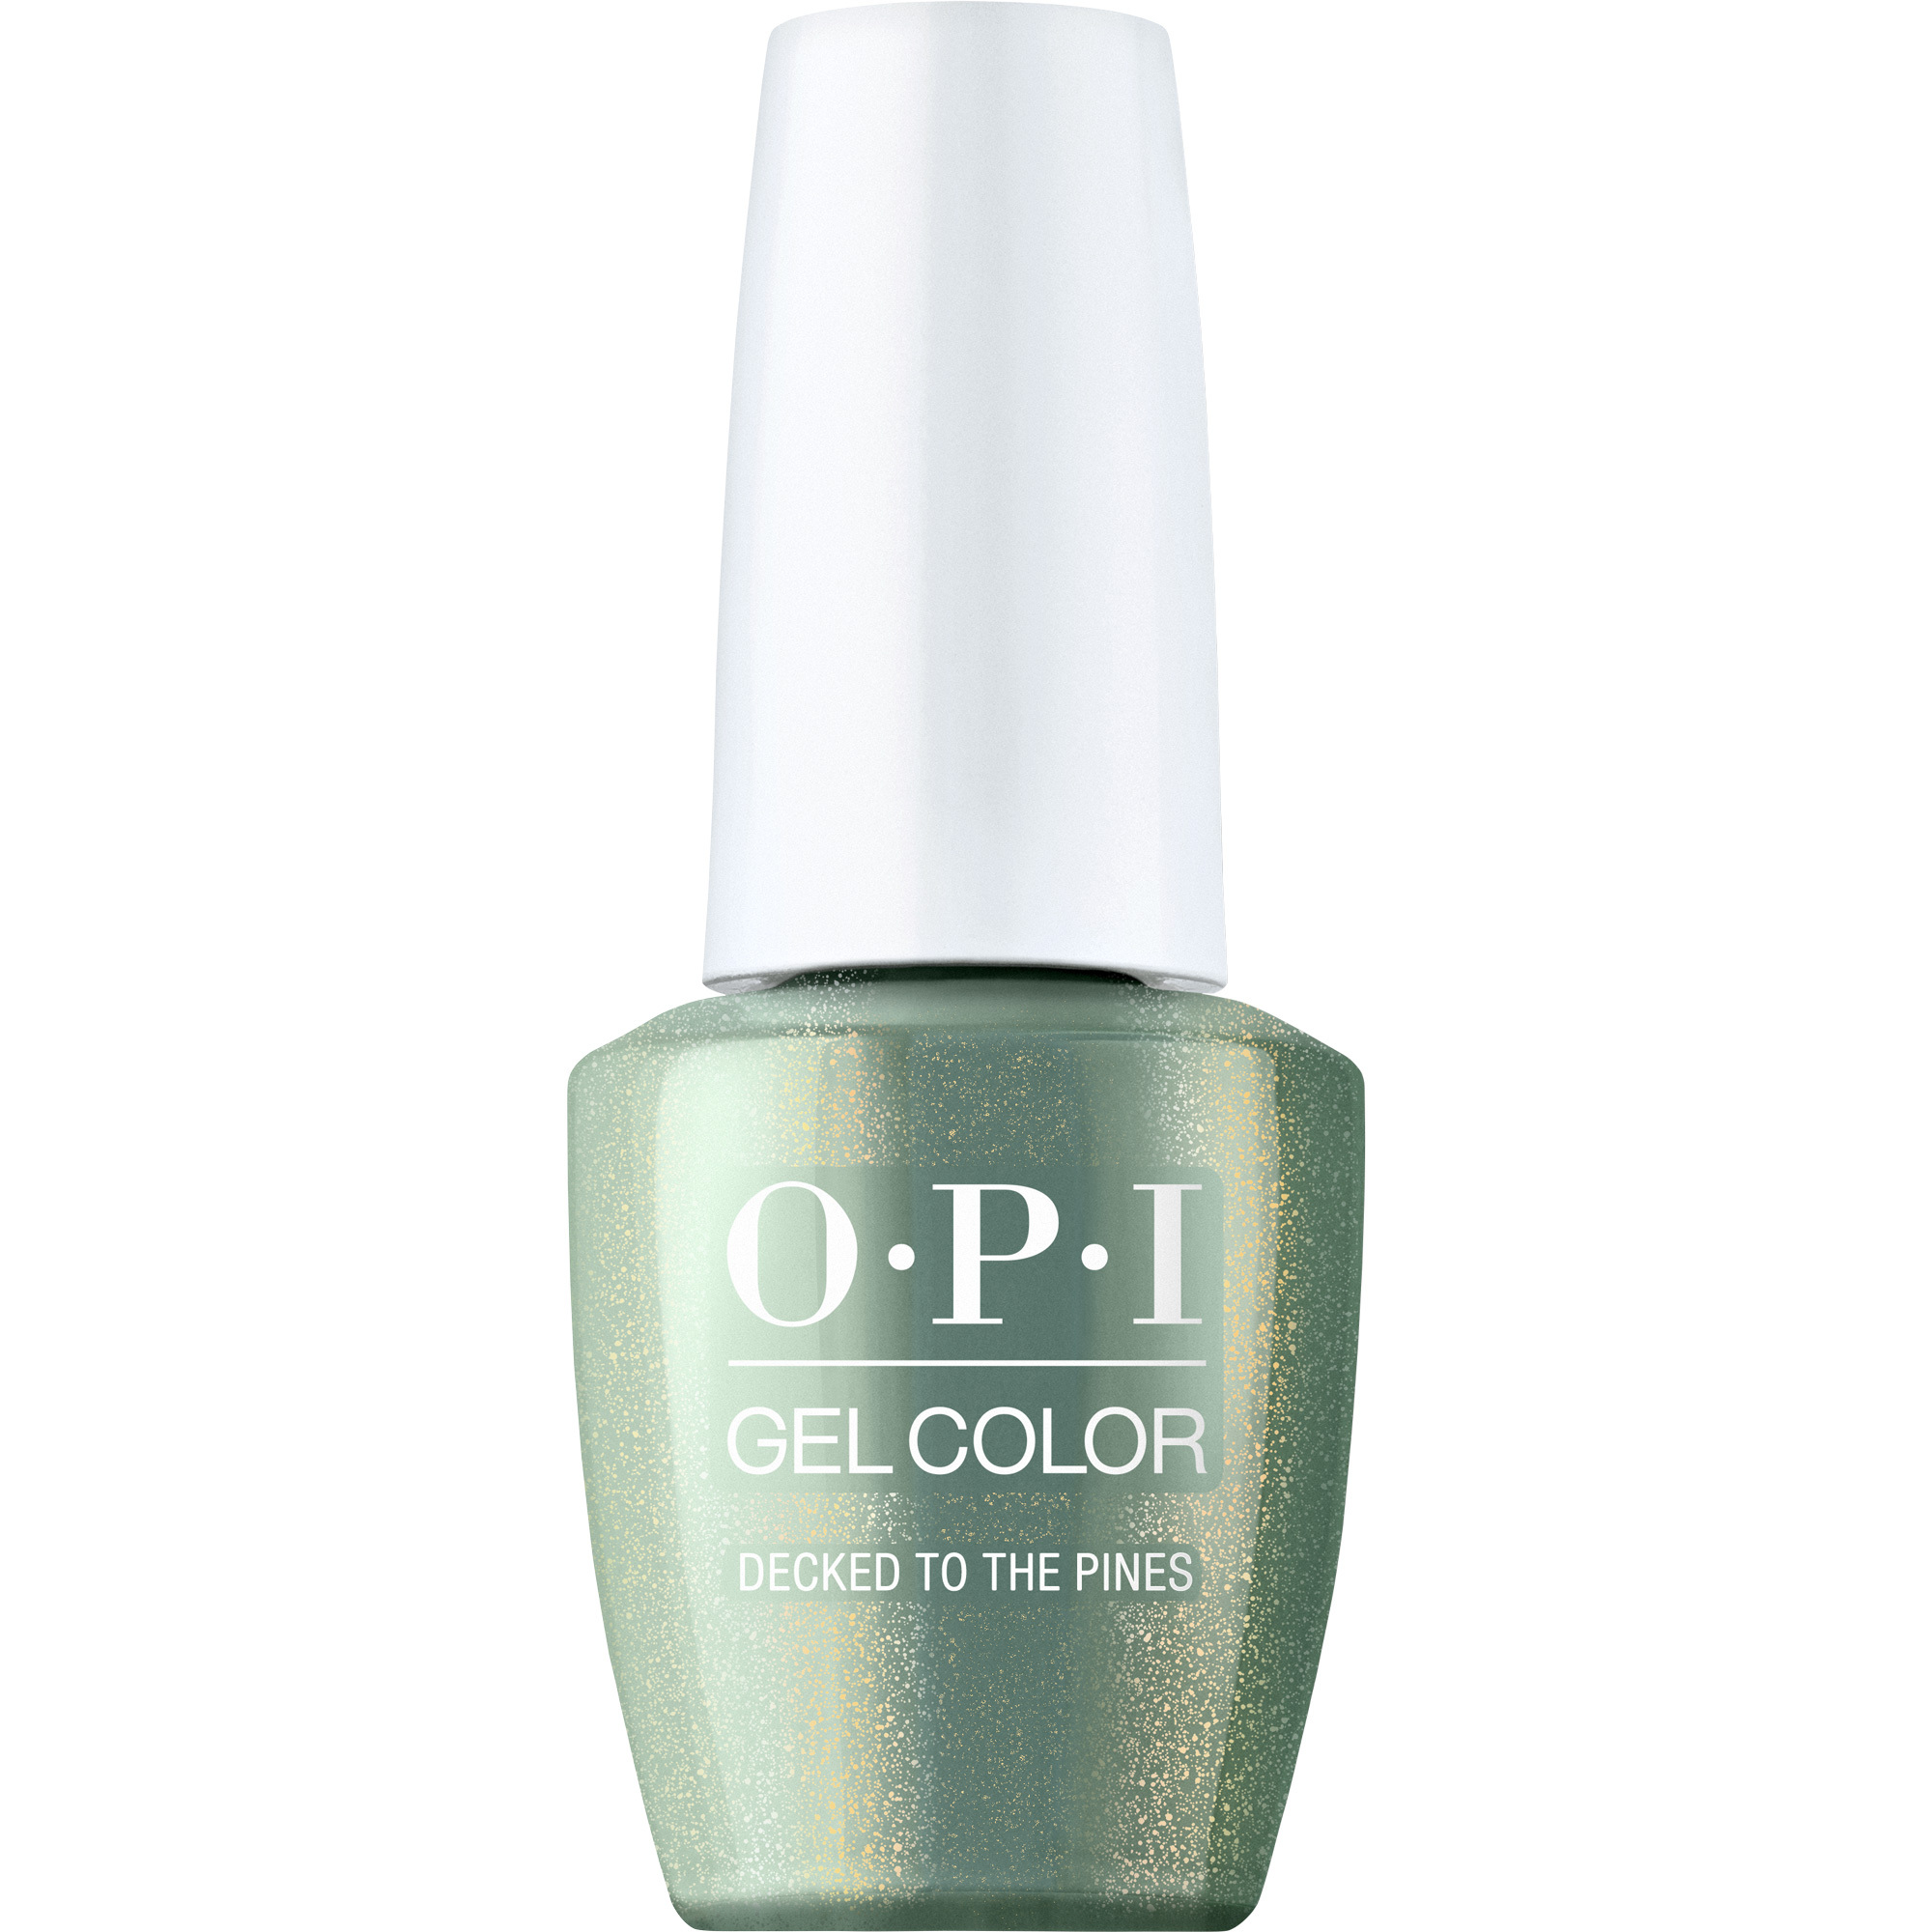 OPI Gel Color 360 - Decked to the Pines